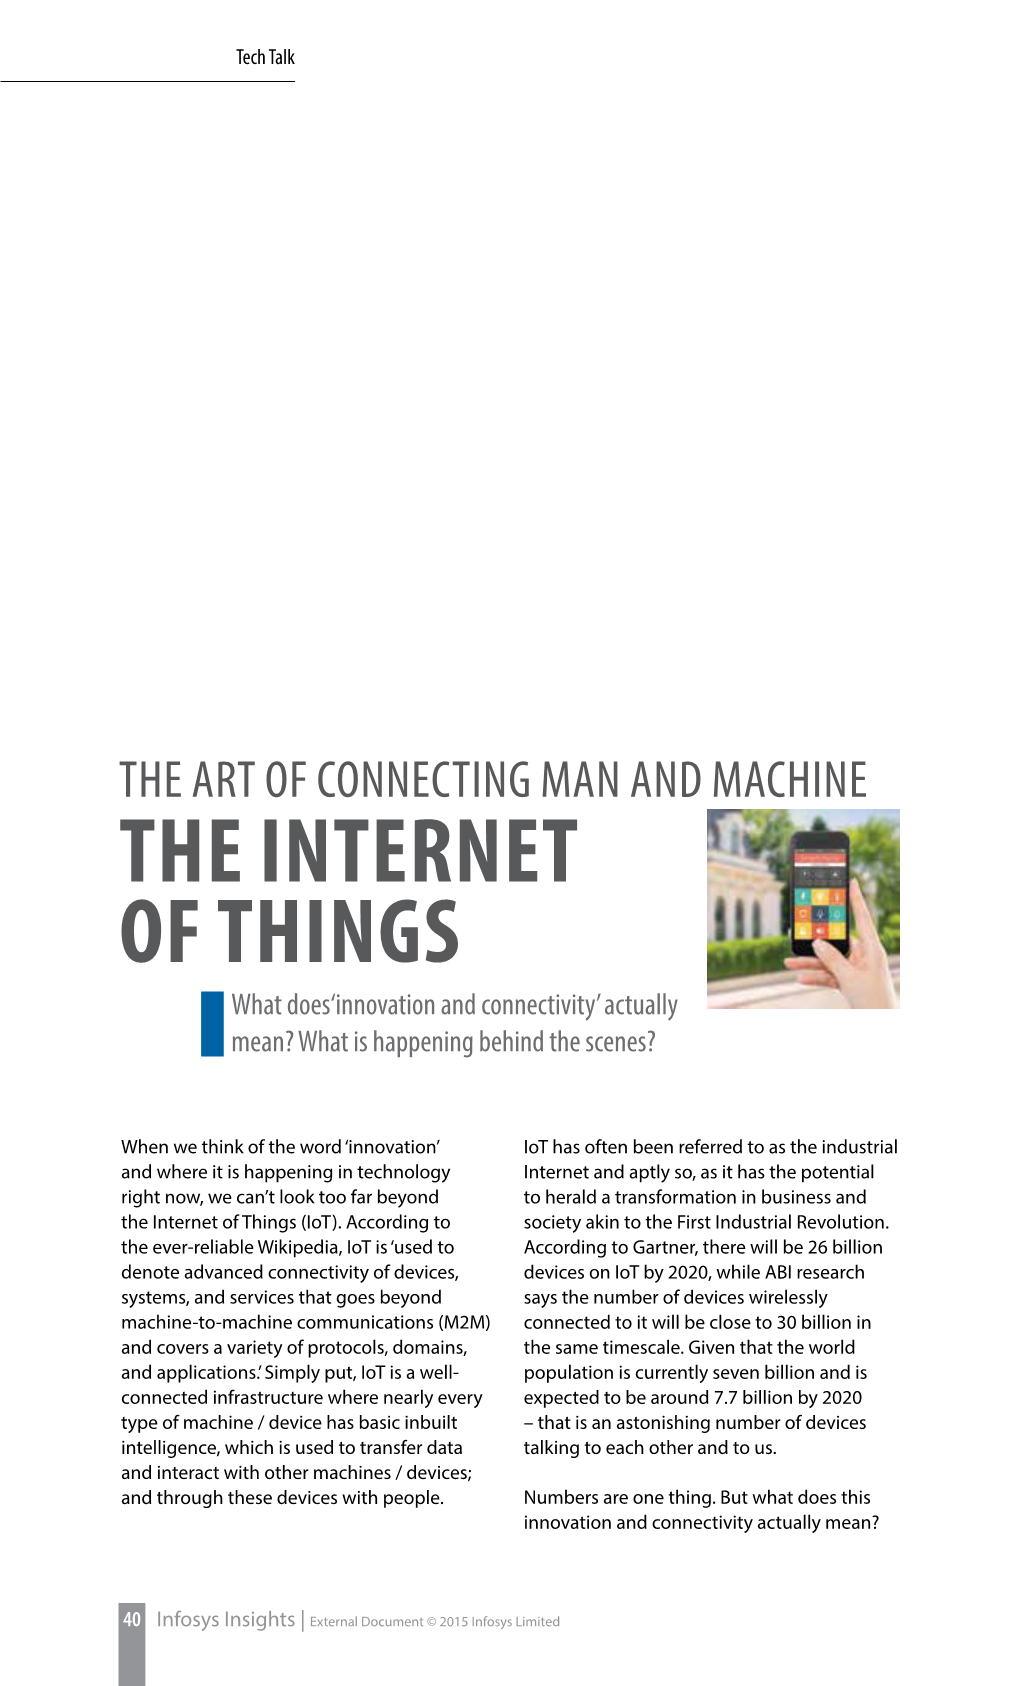 The Internet of Things What Does‘Innovation and Connectivity’ Actually Mean? What Is Happening Behind the Scenes?